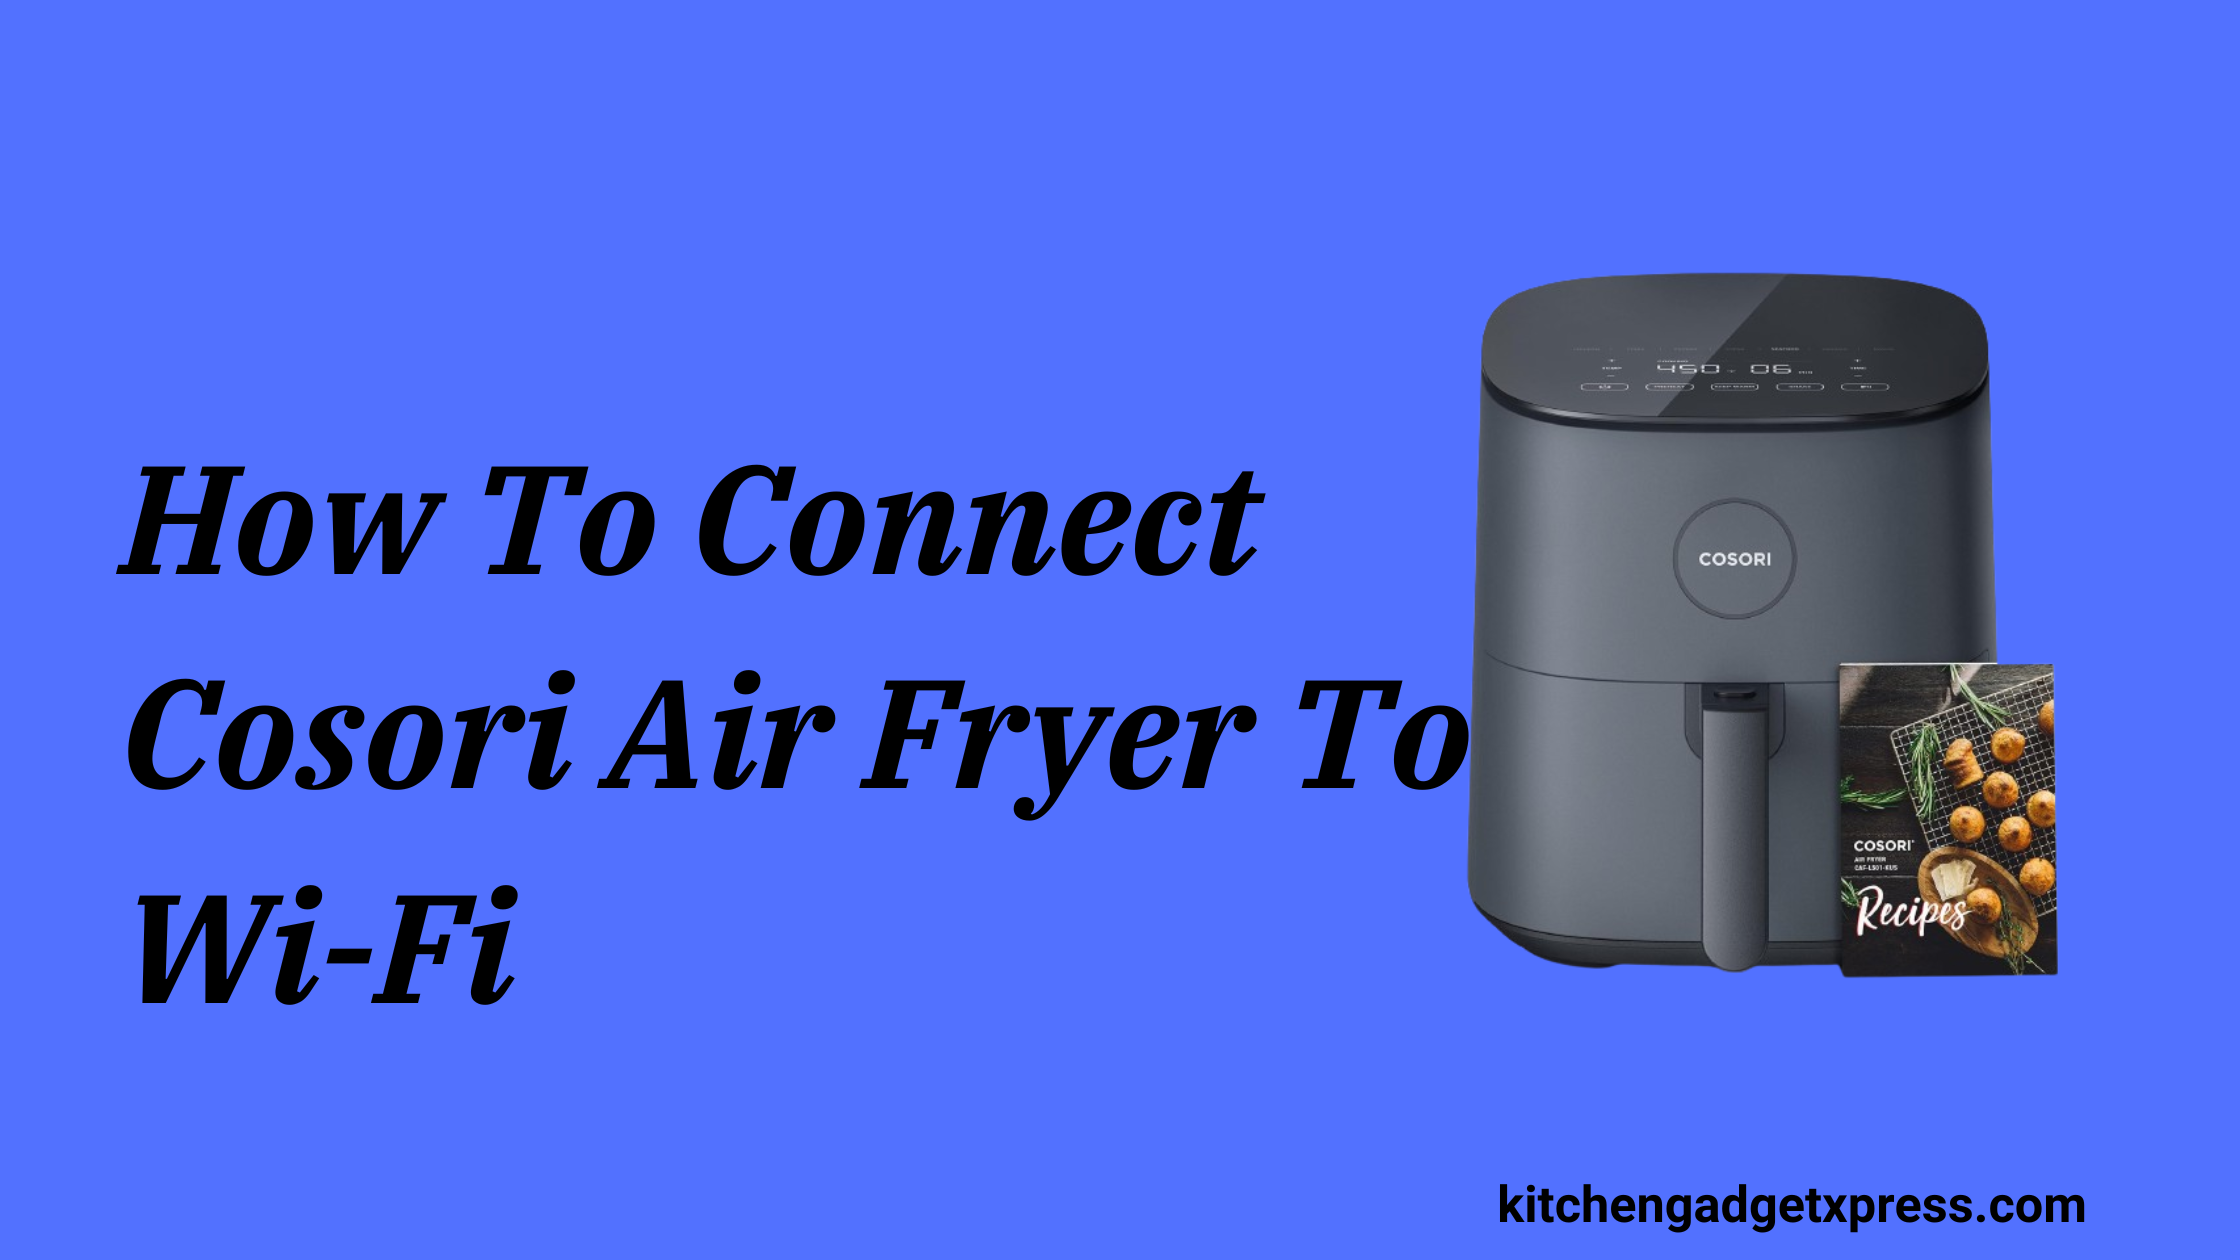 How To Connect Cosori Air Fryer To Wi-Fi